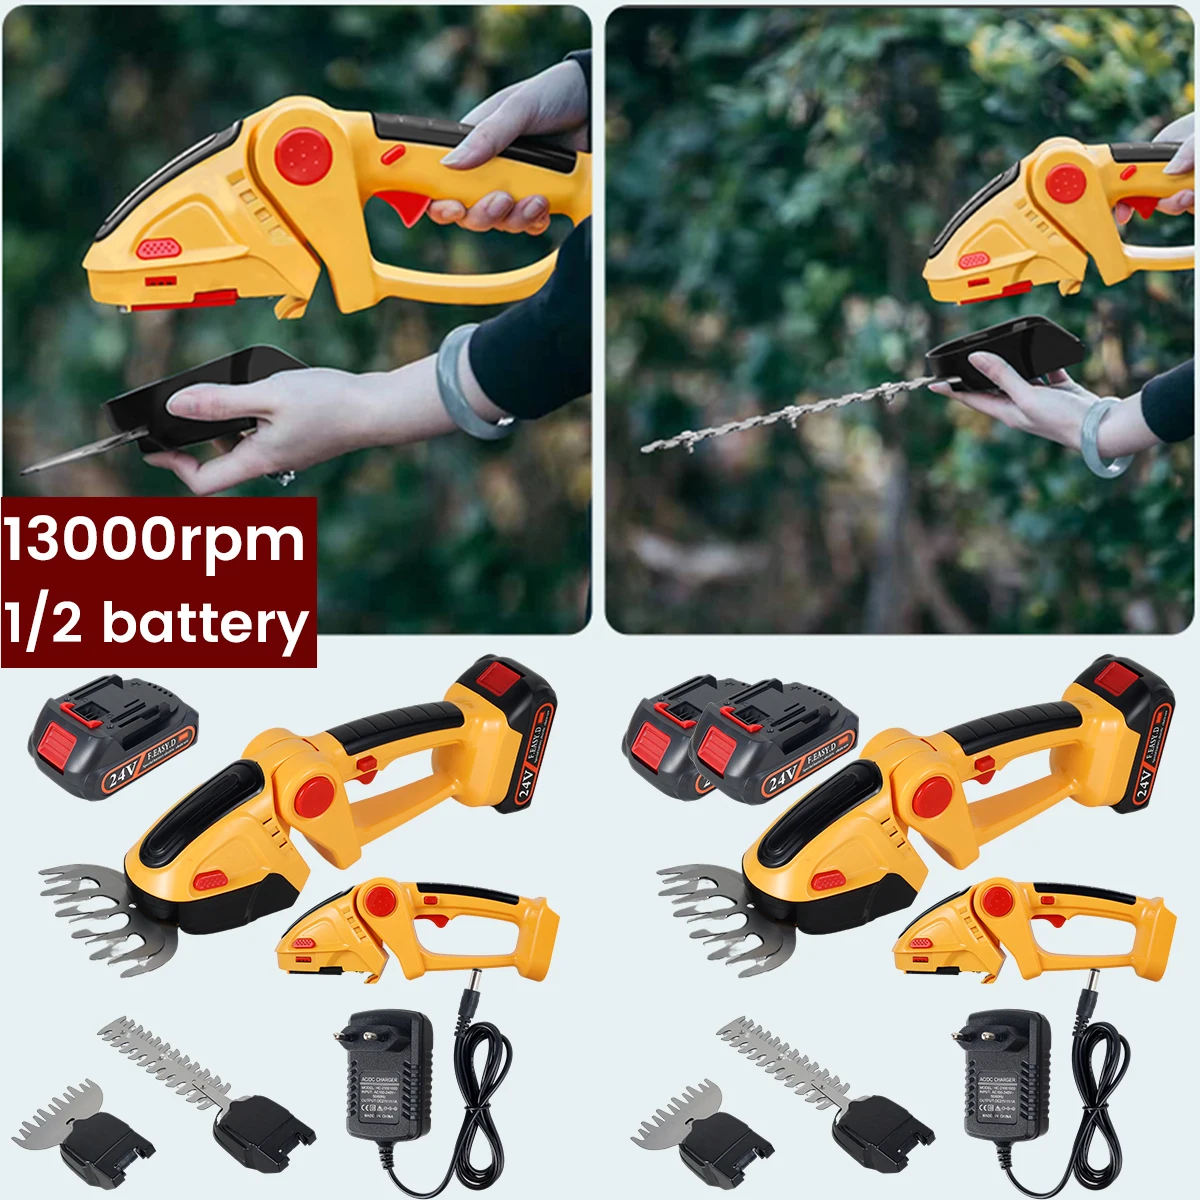 

Electric Hedge Trimmer Manual Hedge Shear Reusable Grass Trimmer Handheld Grass Clipper Cordless Shrubbery Trimmer Professional